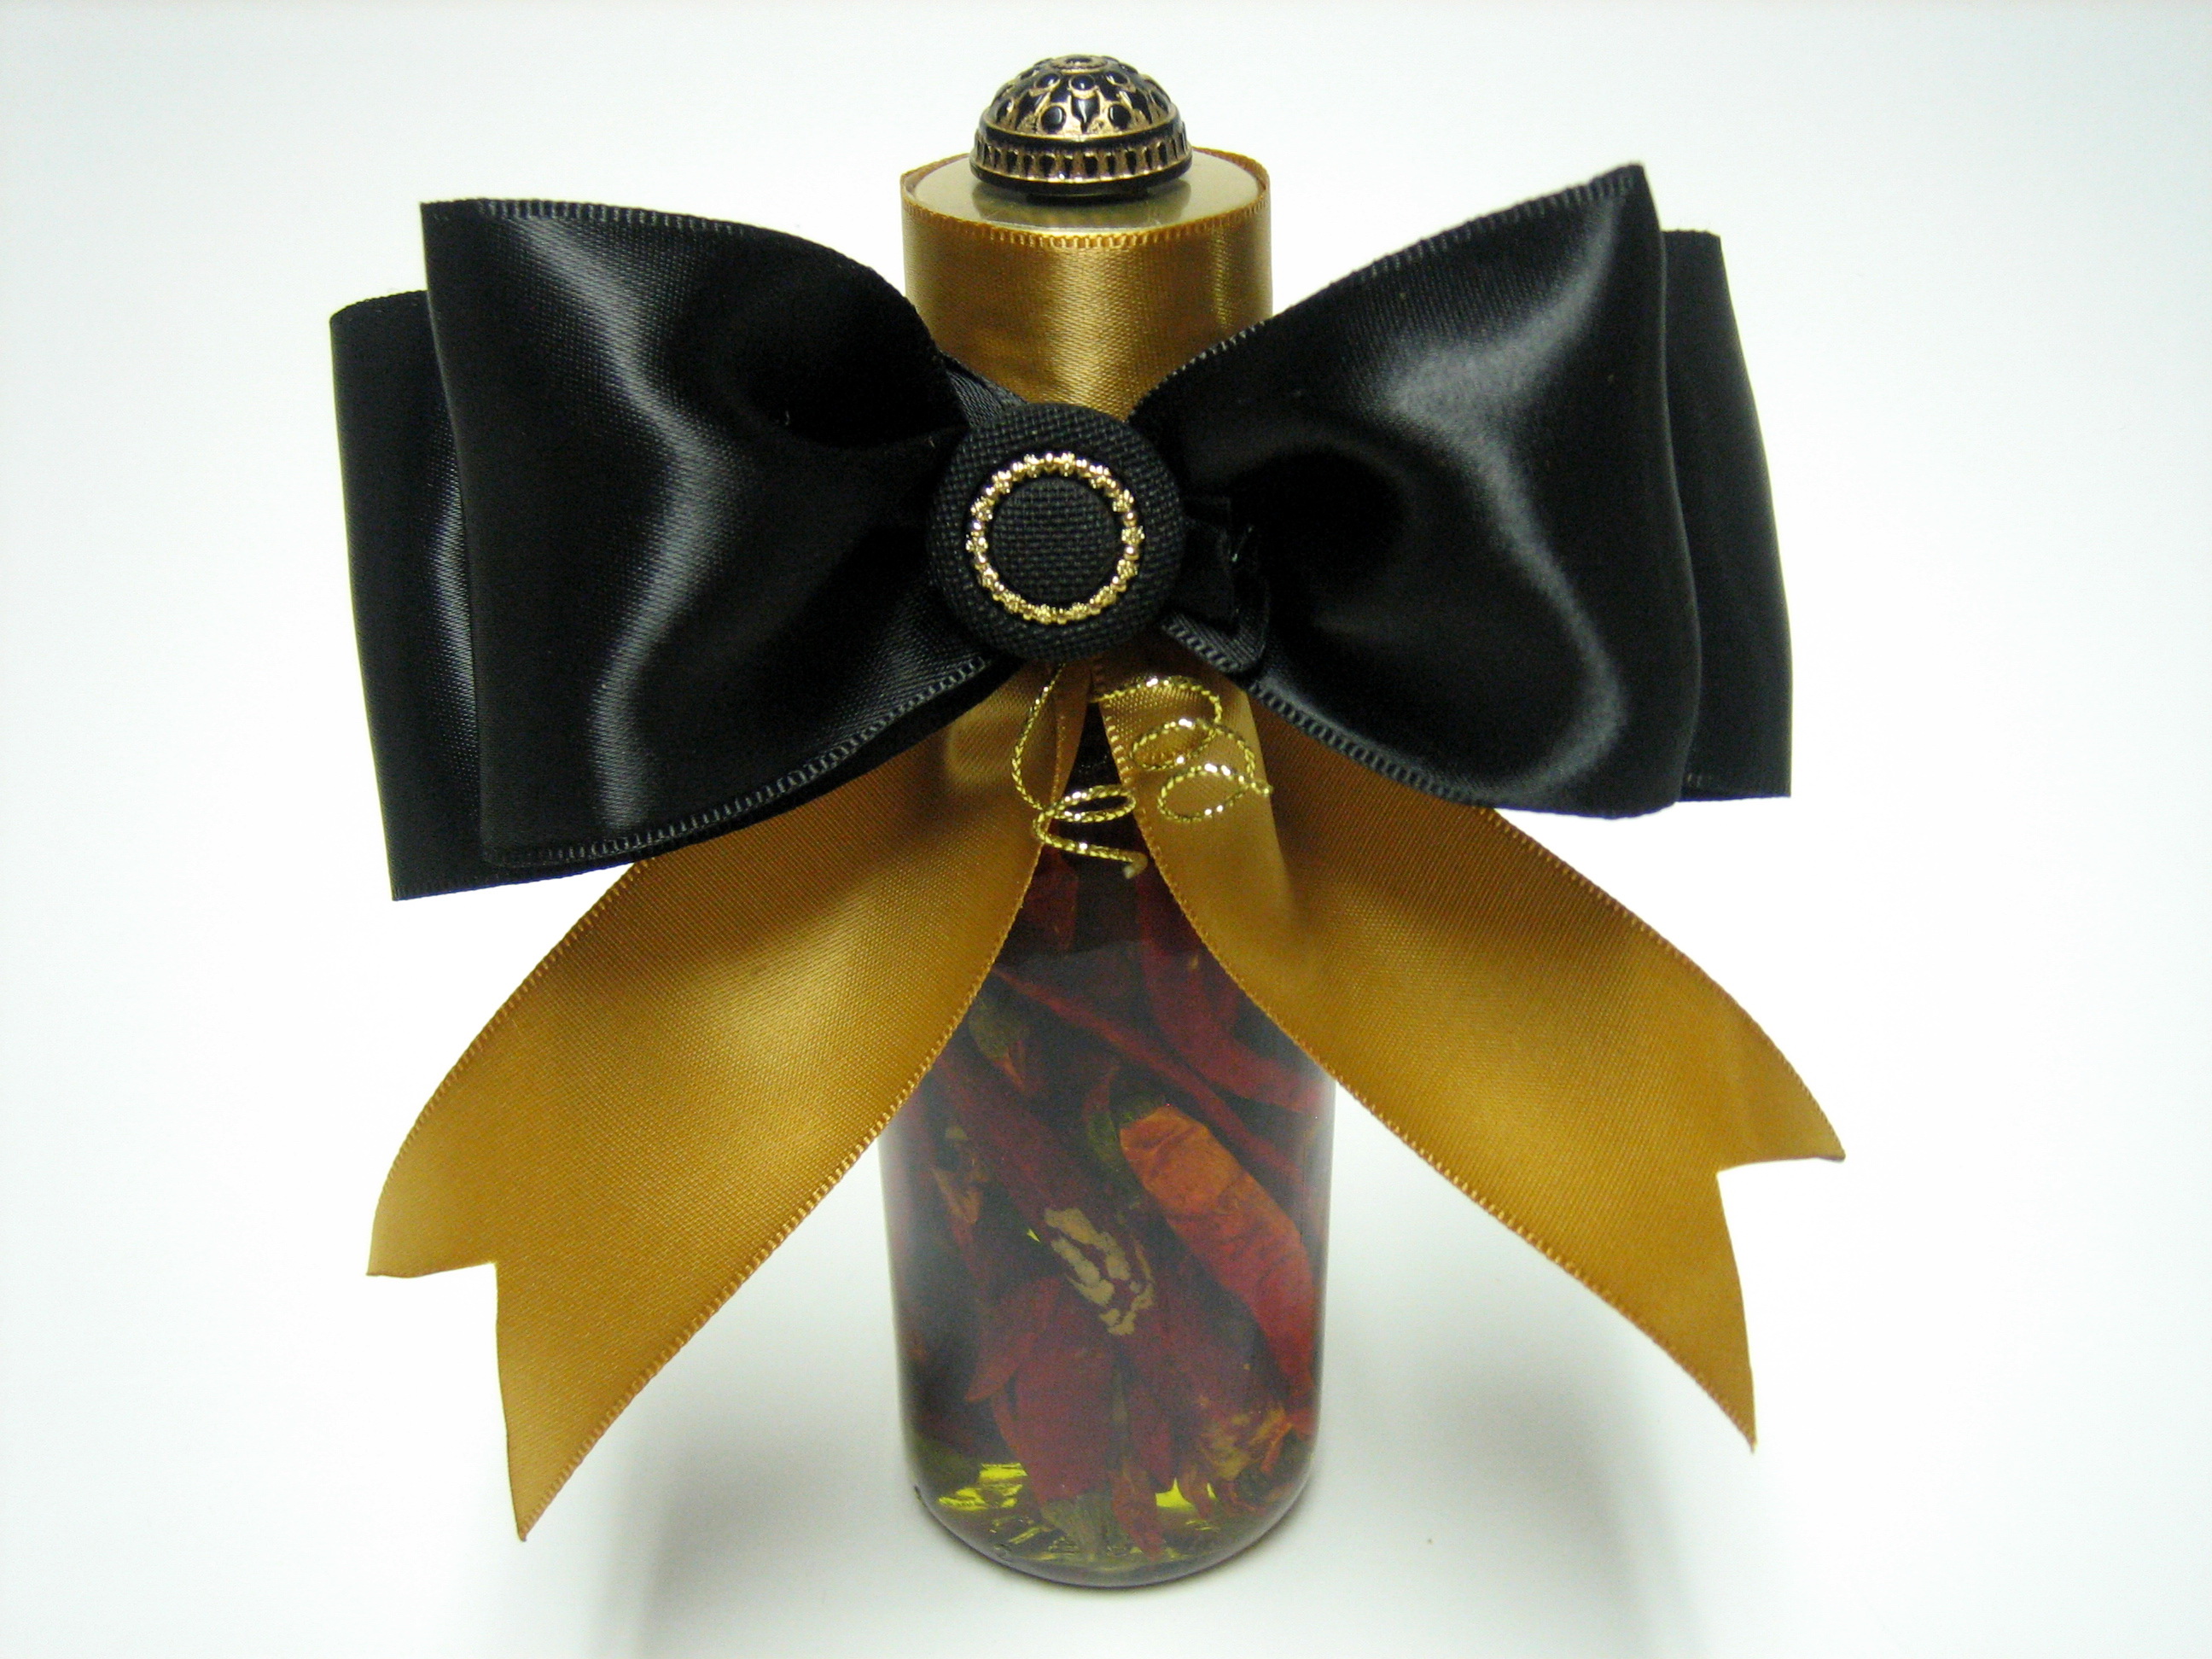 Olive Oil and Dried Peppers - How to make Pretty bows with ribbons